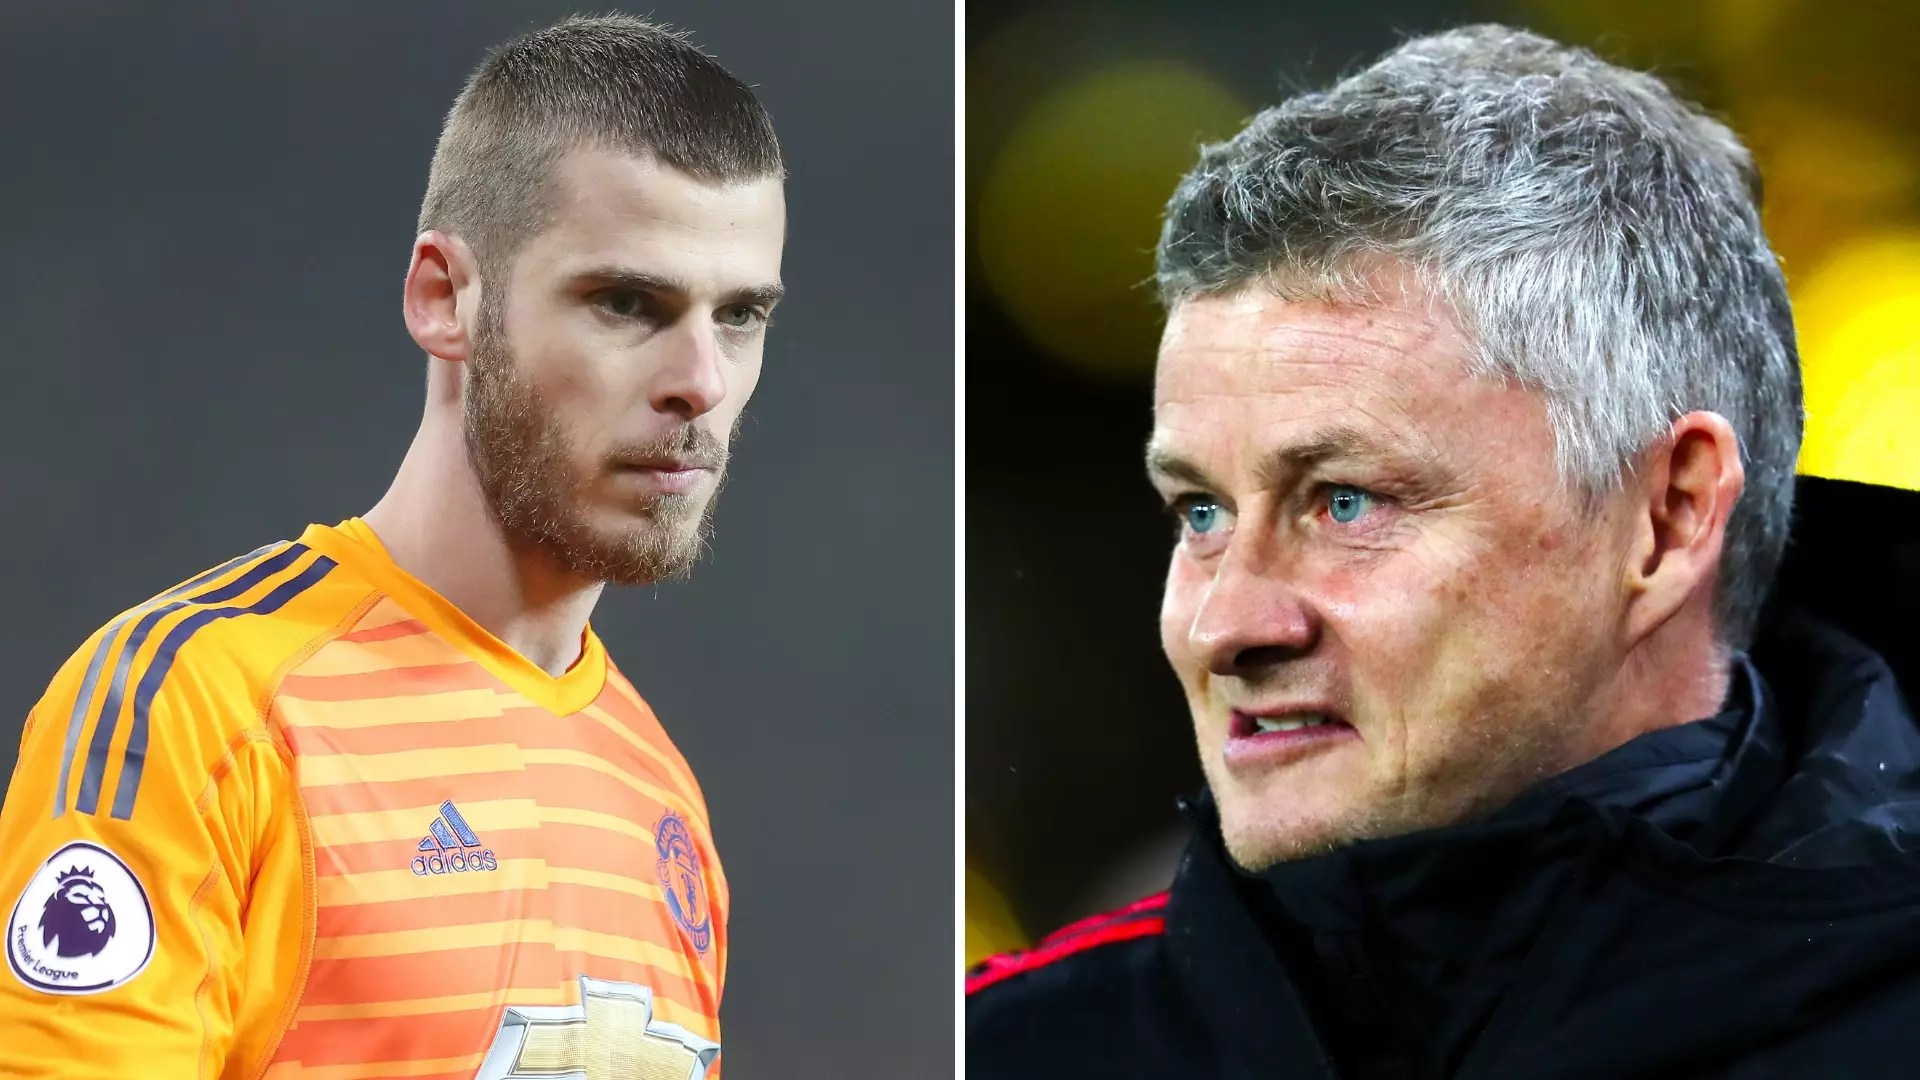 The Staggering Amount Of Money David De Gea Wants To Stay At Old Trafford Next Season